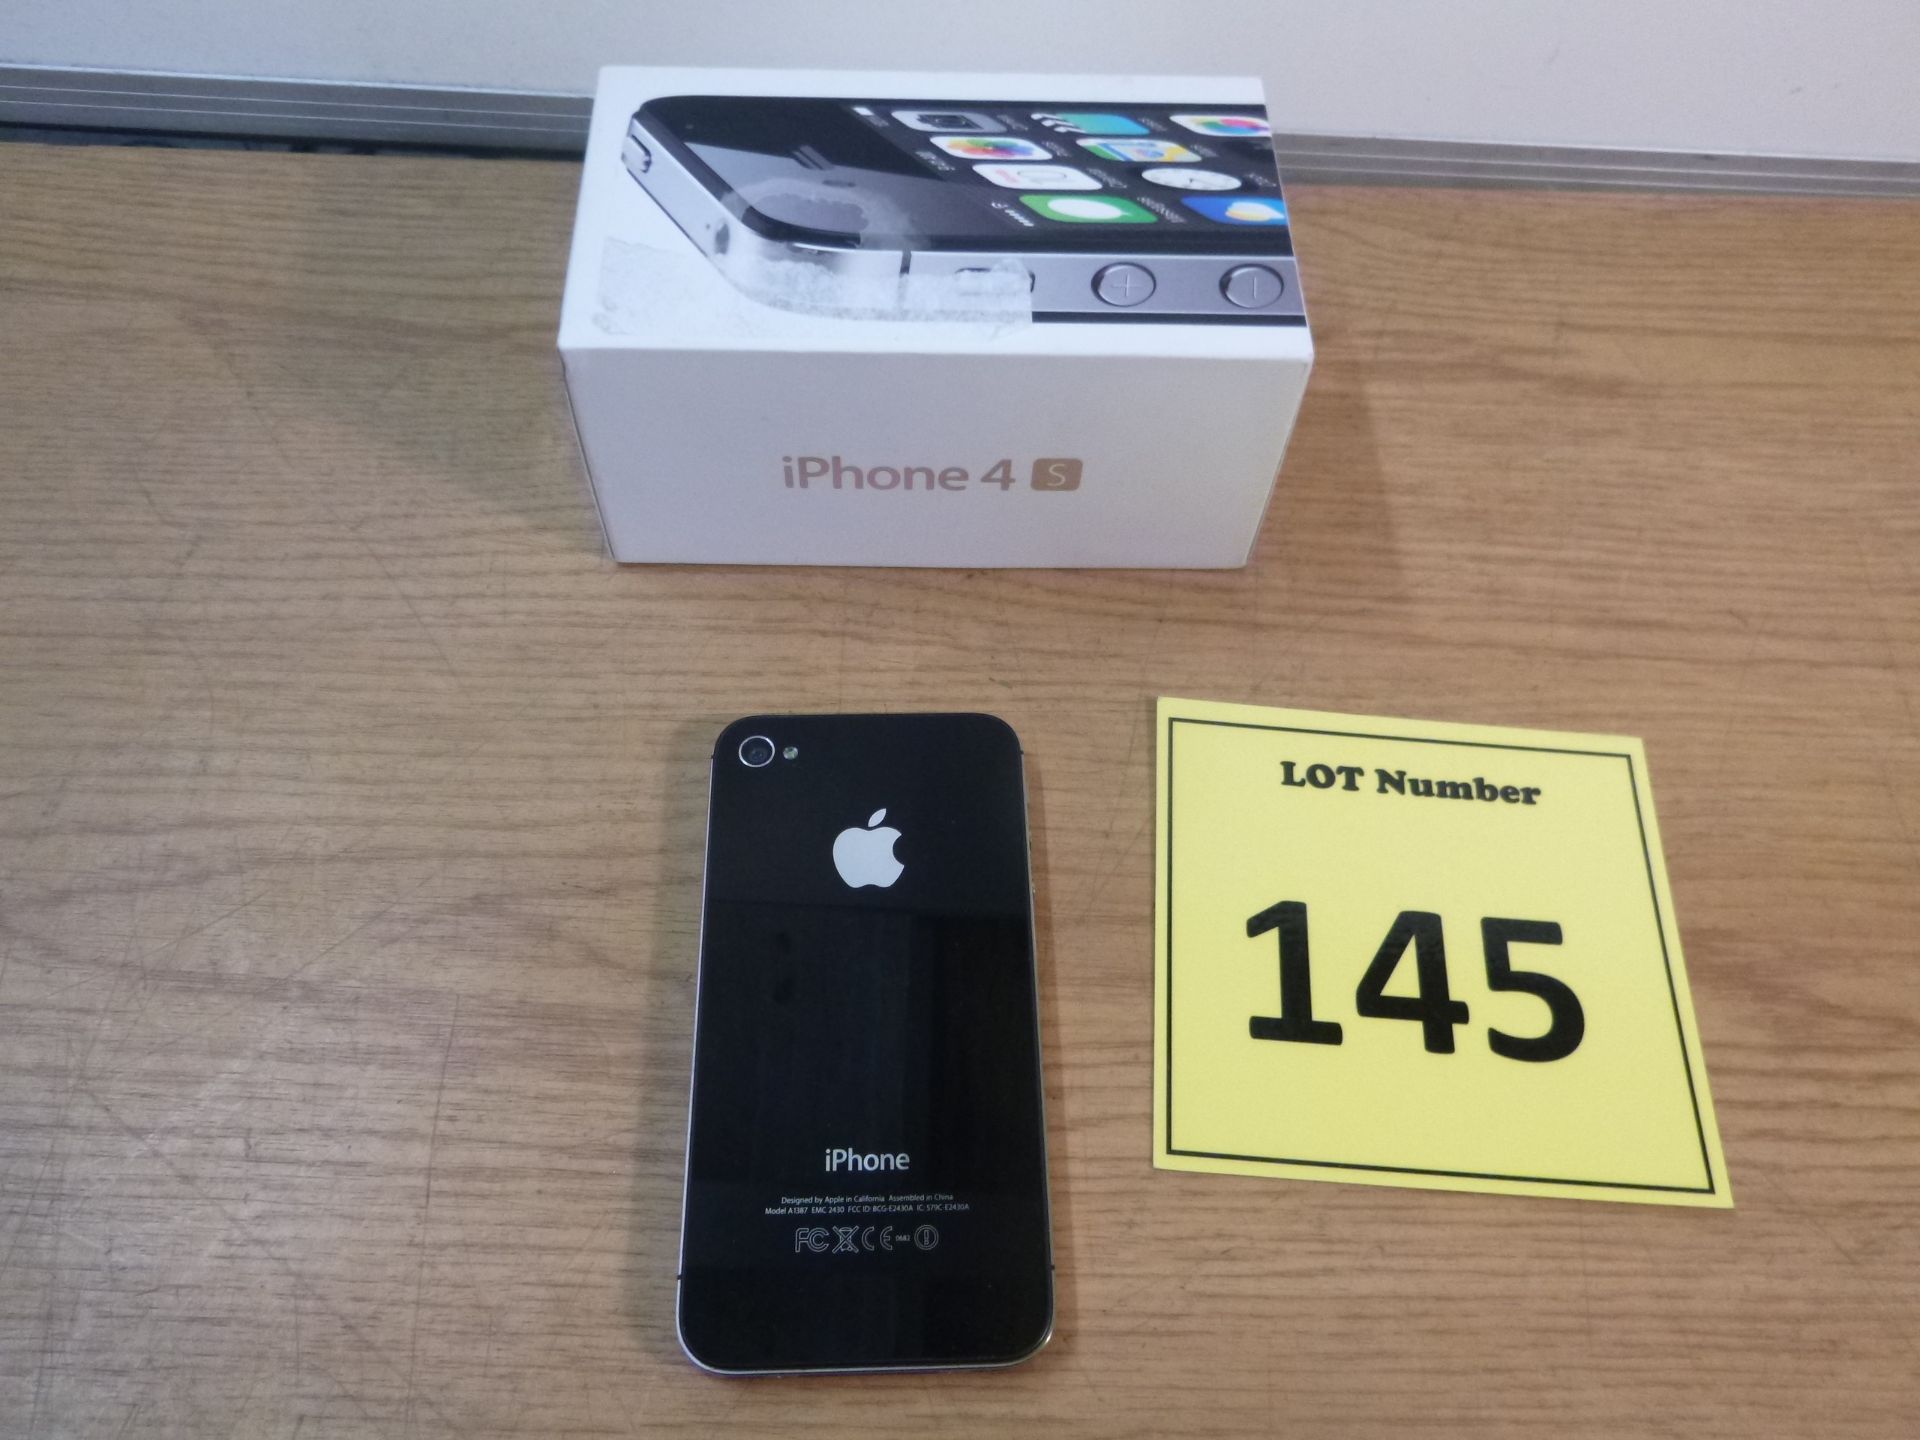 APPLE IPHONE 4S 8GB. MODEL A1387. WITH BOX. IN VERY CLEAN CONDITION - Image 2 of 2